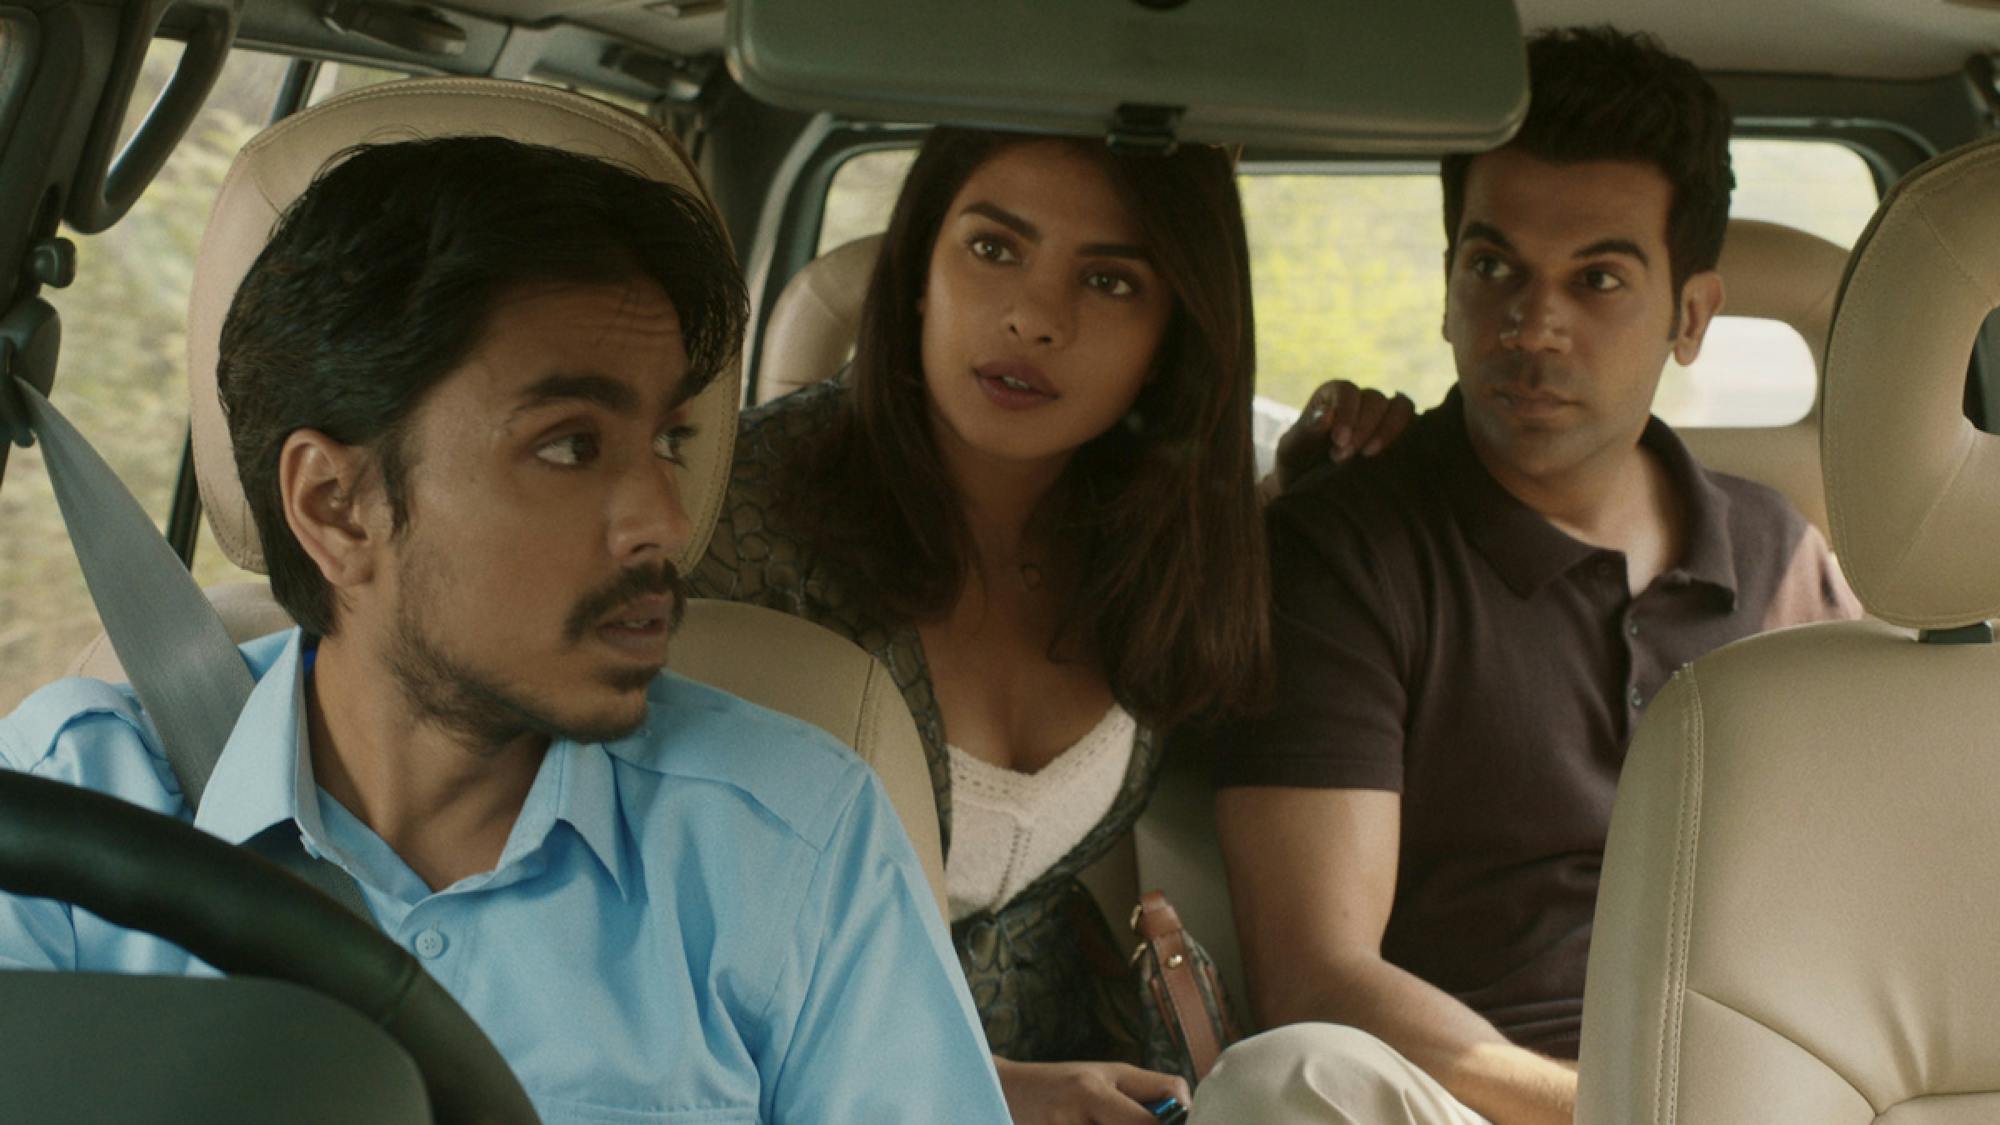 Balram (Adarsh Gourav), Pinky Madam (Priyanka Chopra Jonas) and Ashok (Rajkummar Rao) are inside a car. Balram is driving while Pinky and Ashok sit in the backseat. They are looking towards Balram who appears to be speaking to them from the front of the car. The interiors are covered in a nice cream leather. 